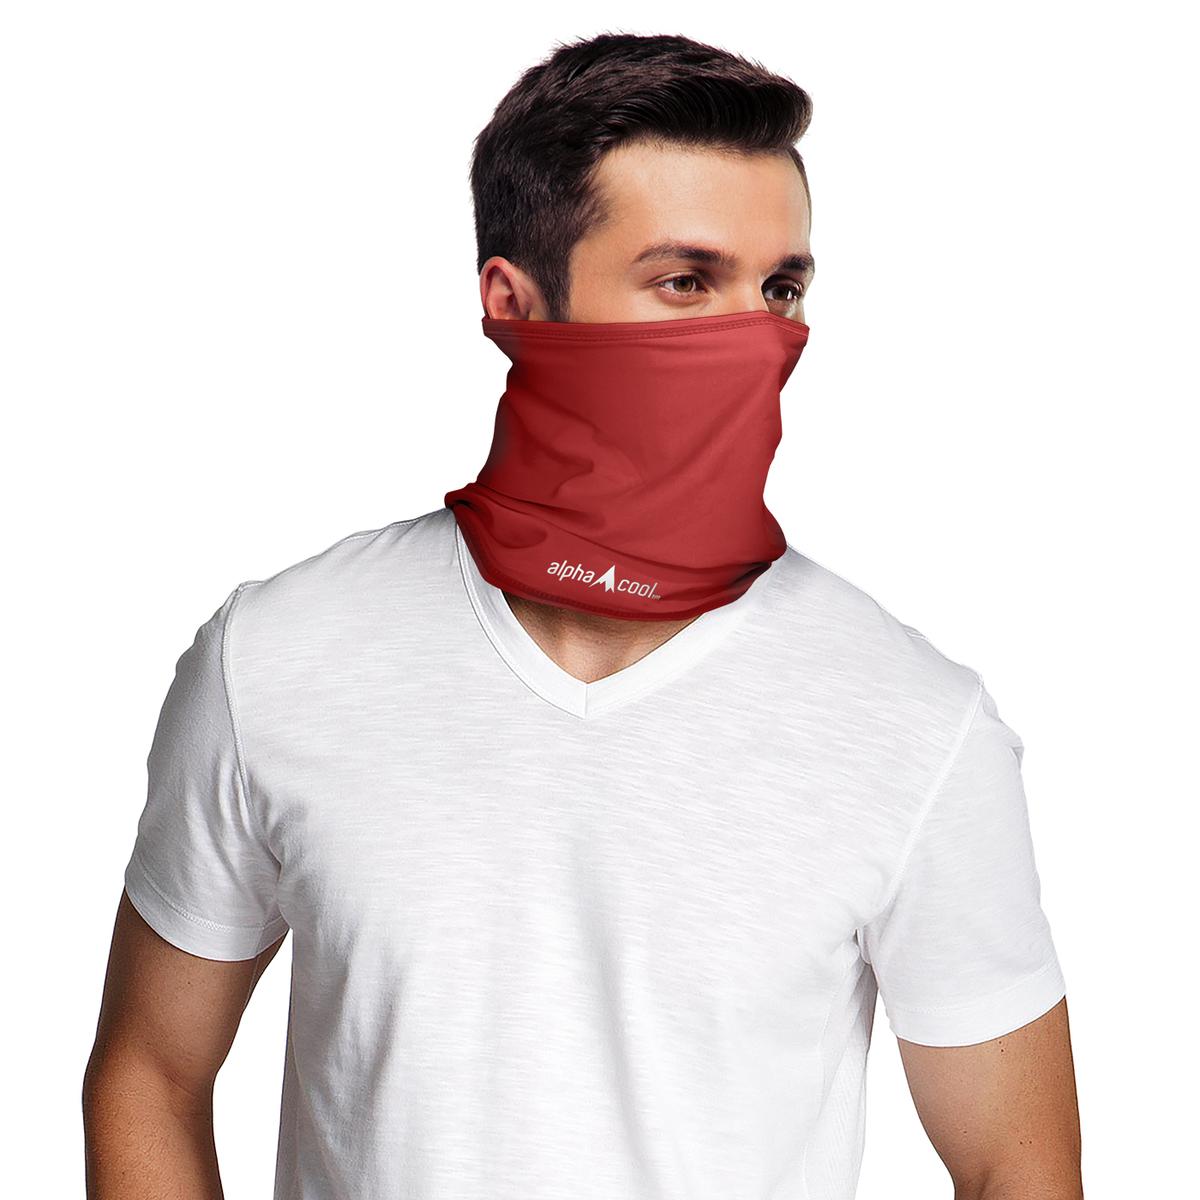 AlphaCool Cooling Neck Gaiter - Cooling